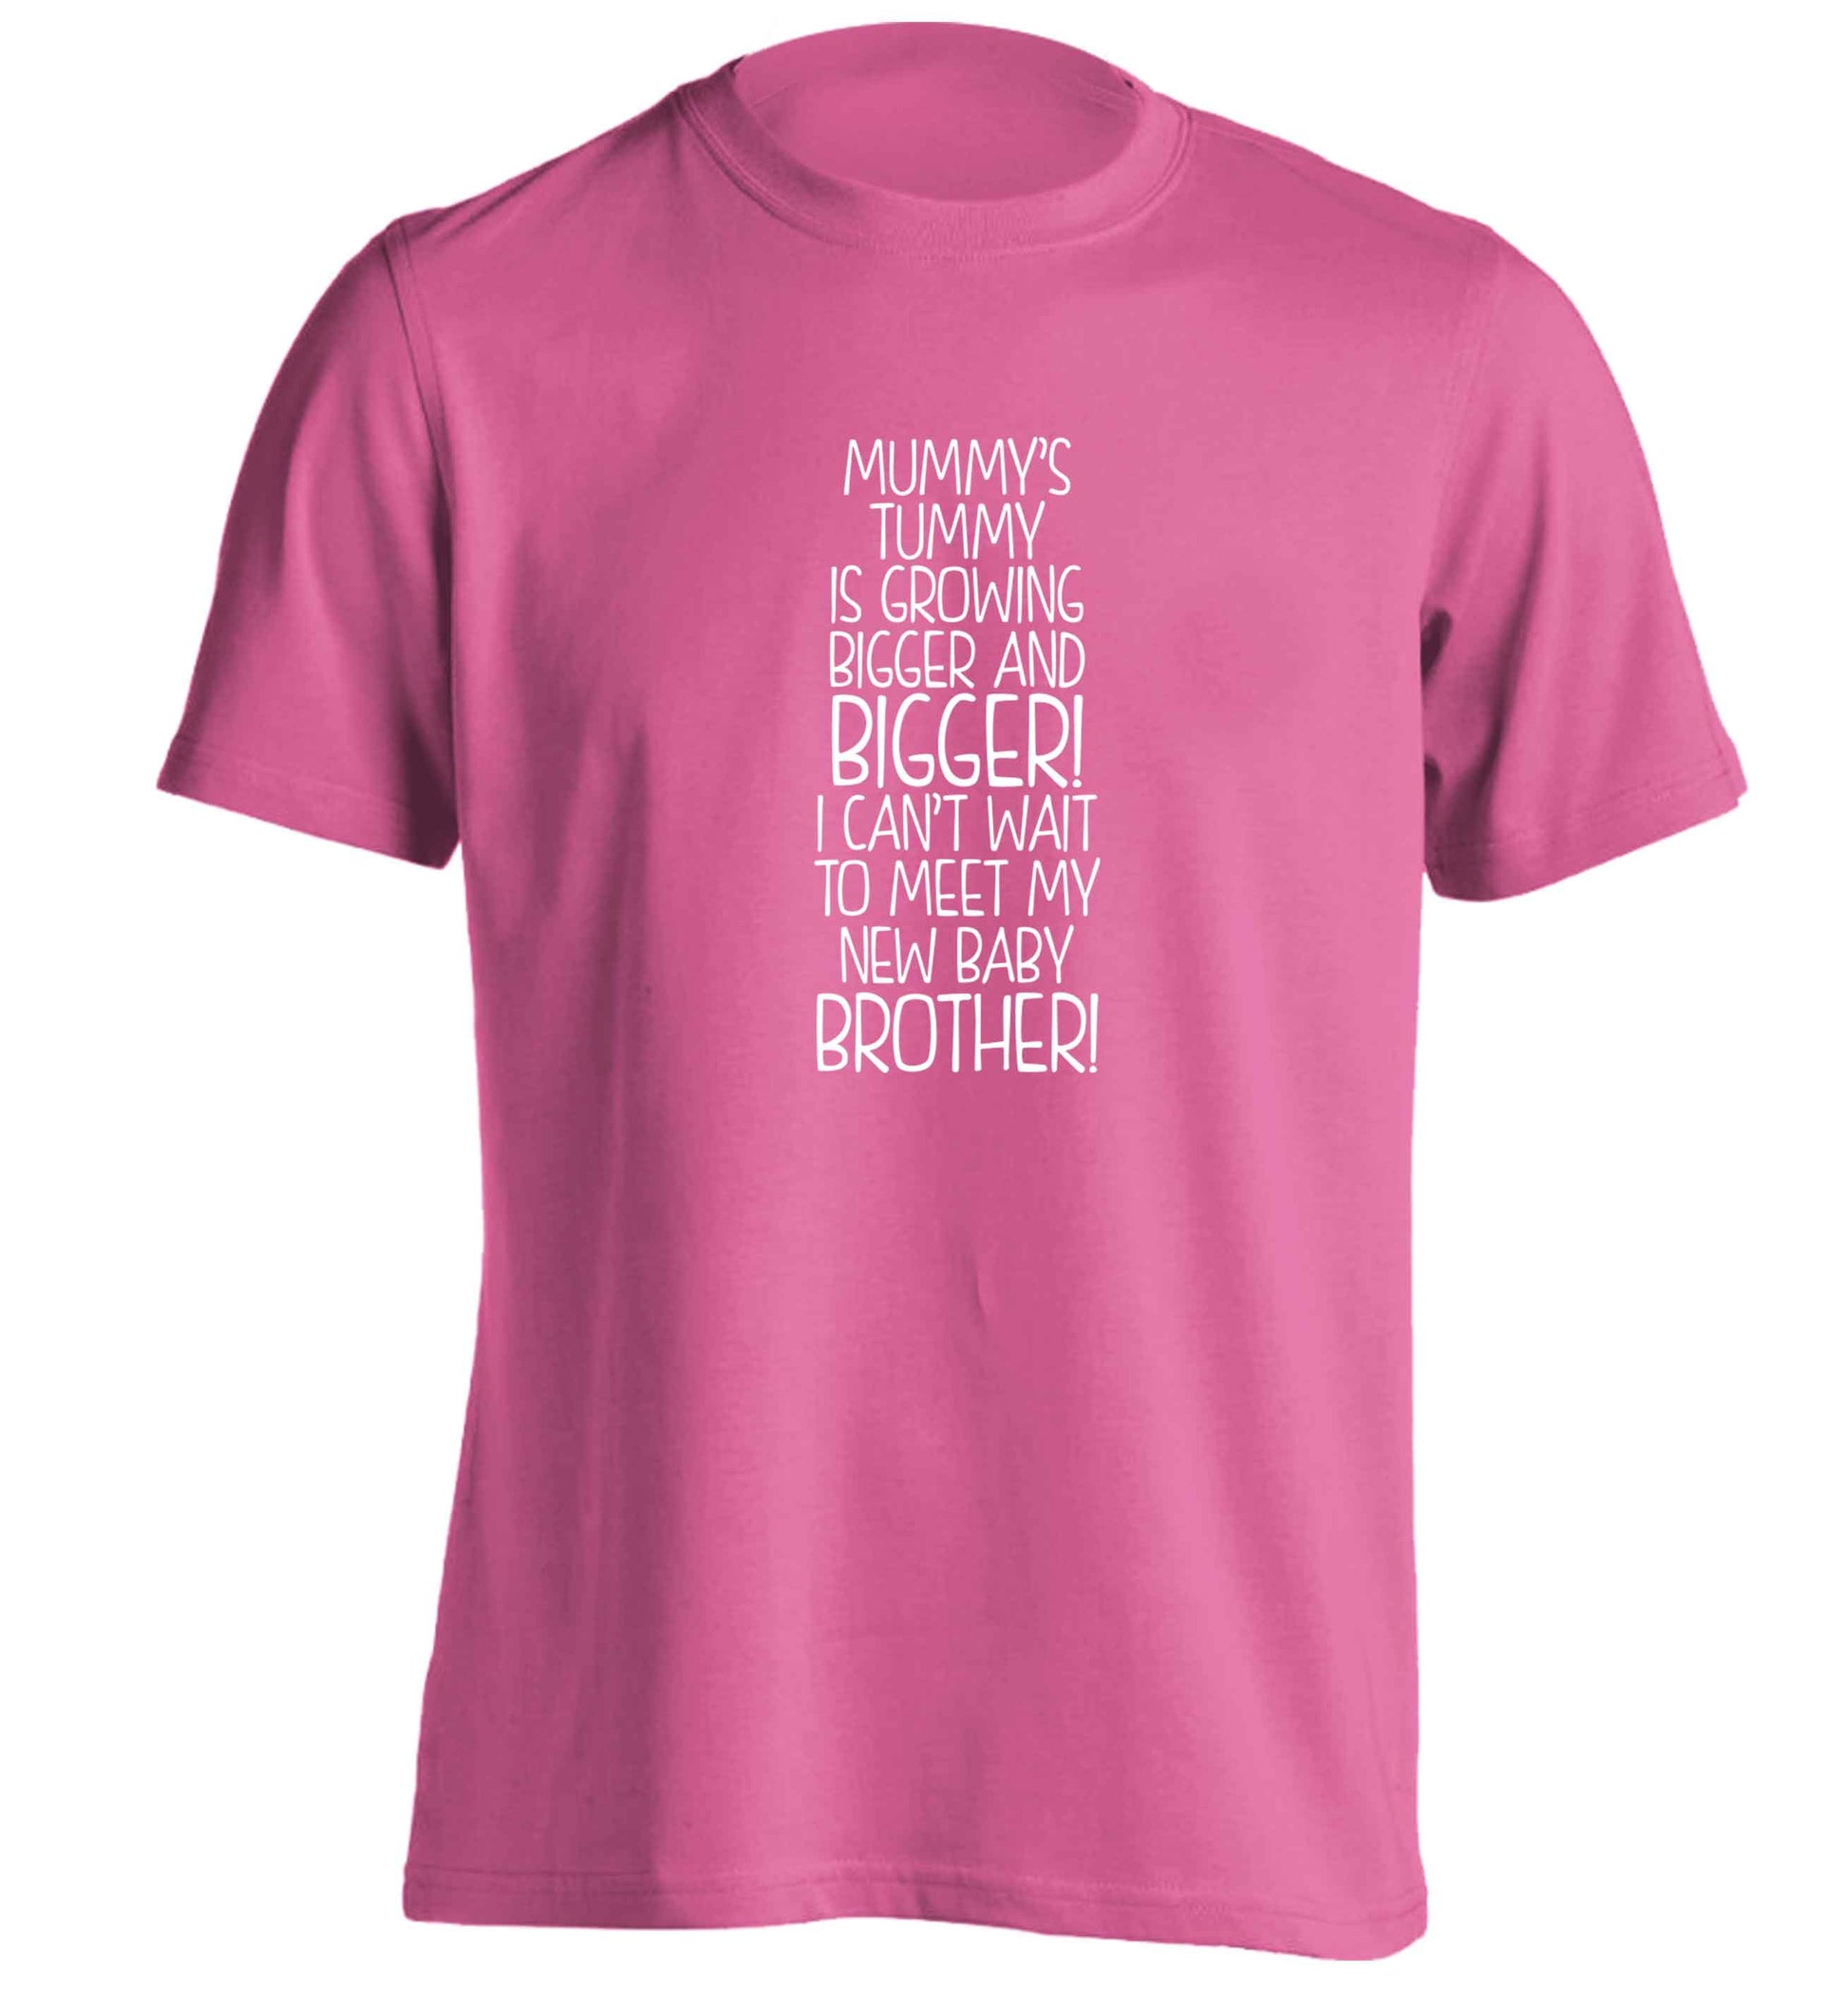 Mummy's tummy is growing bigger and bigger I can't wait to meet my new baby brother! adults unisex pink Tshirt 2XL